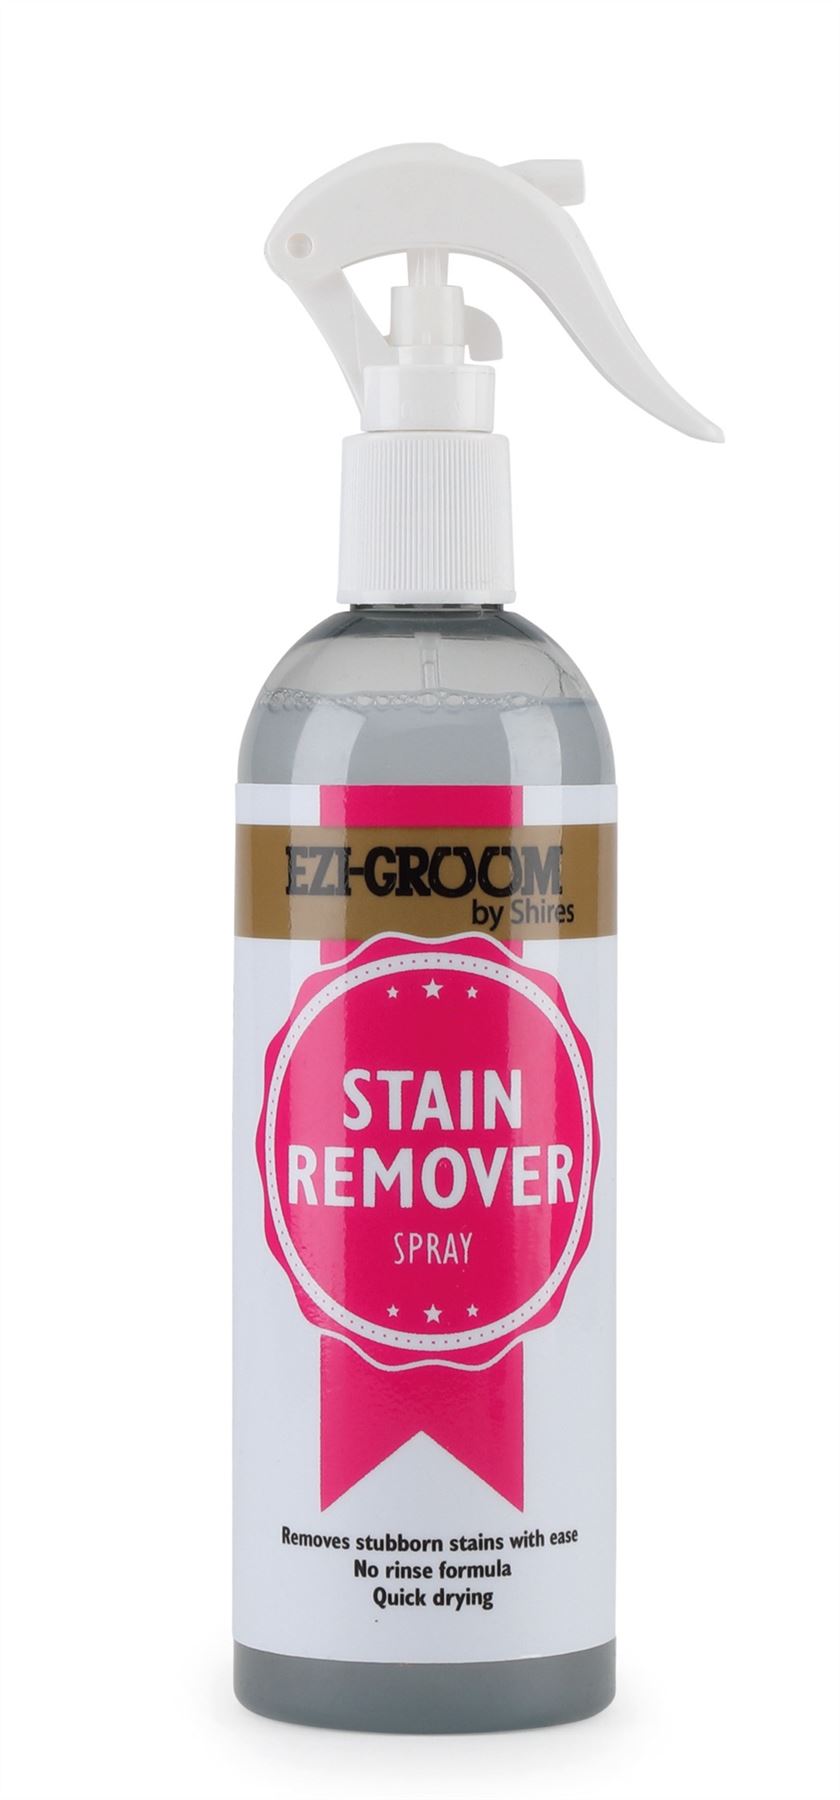 Shires EZI-GROOM STAIN REMOVER - Just Horse Riders